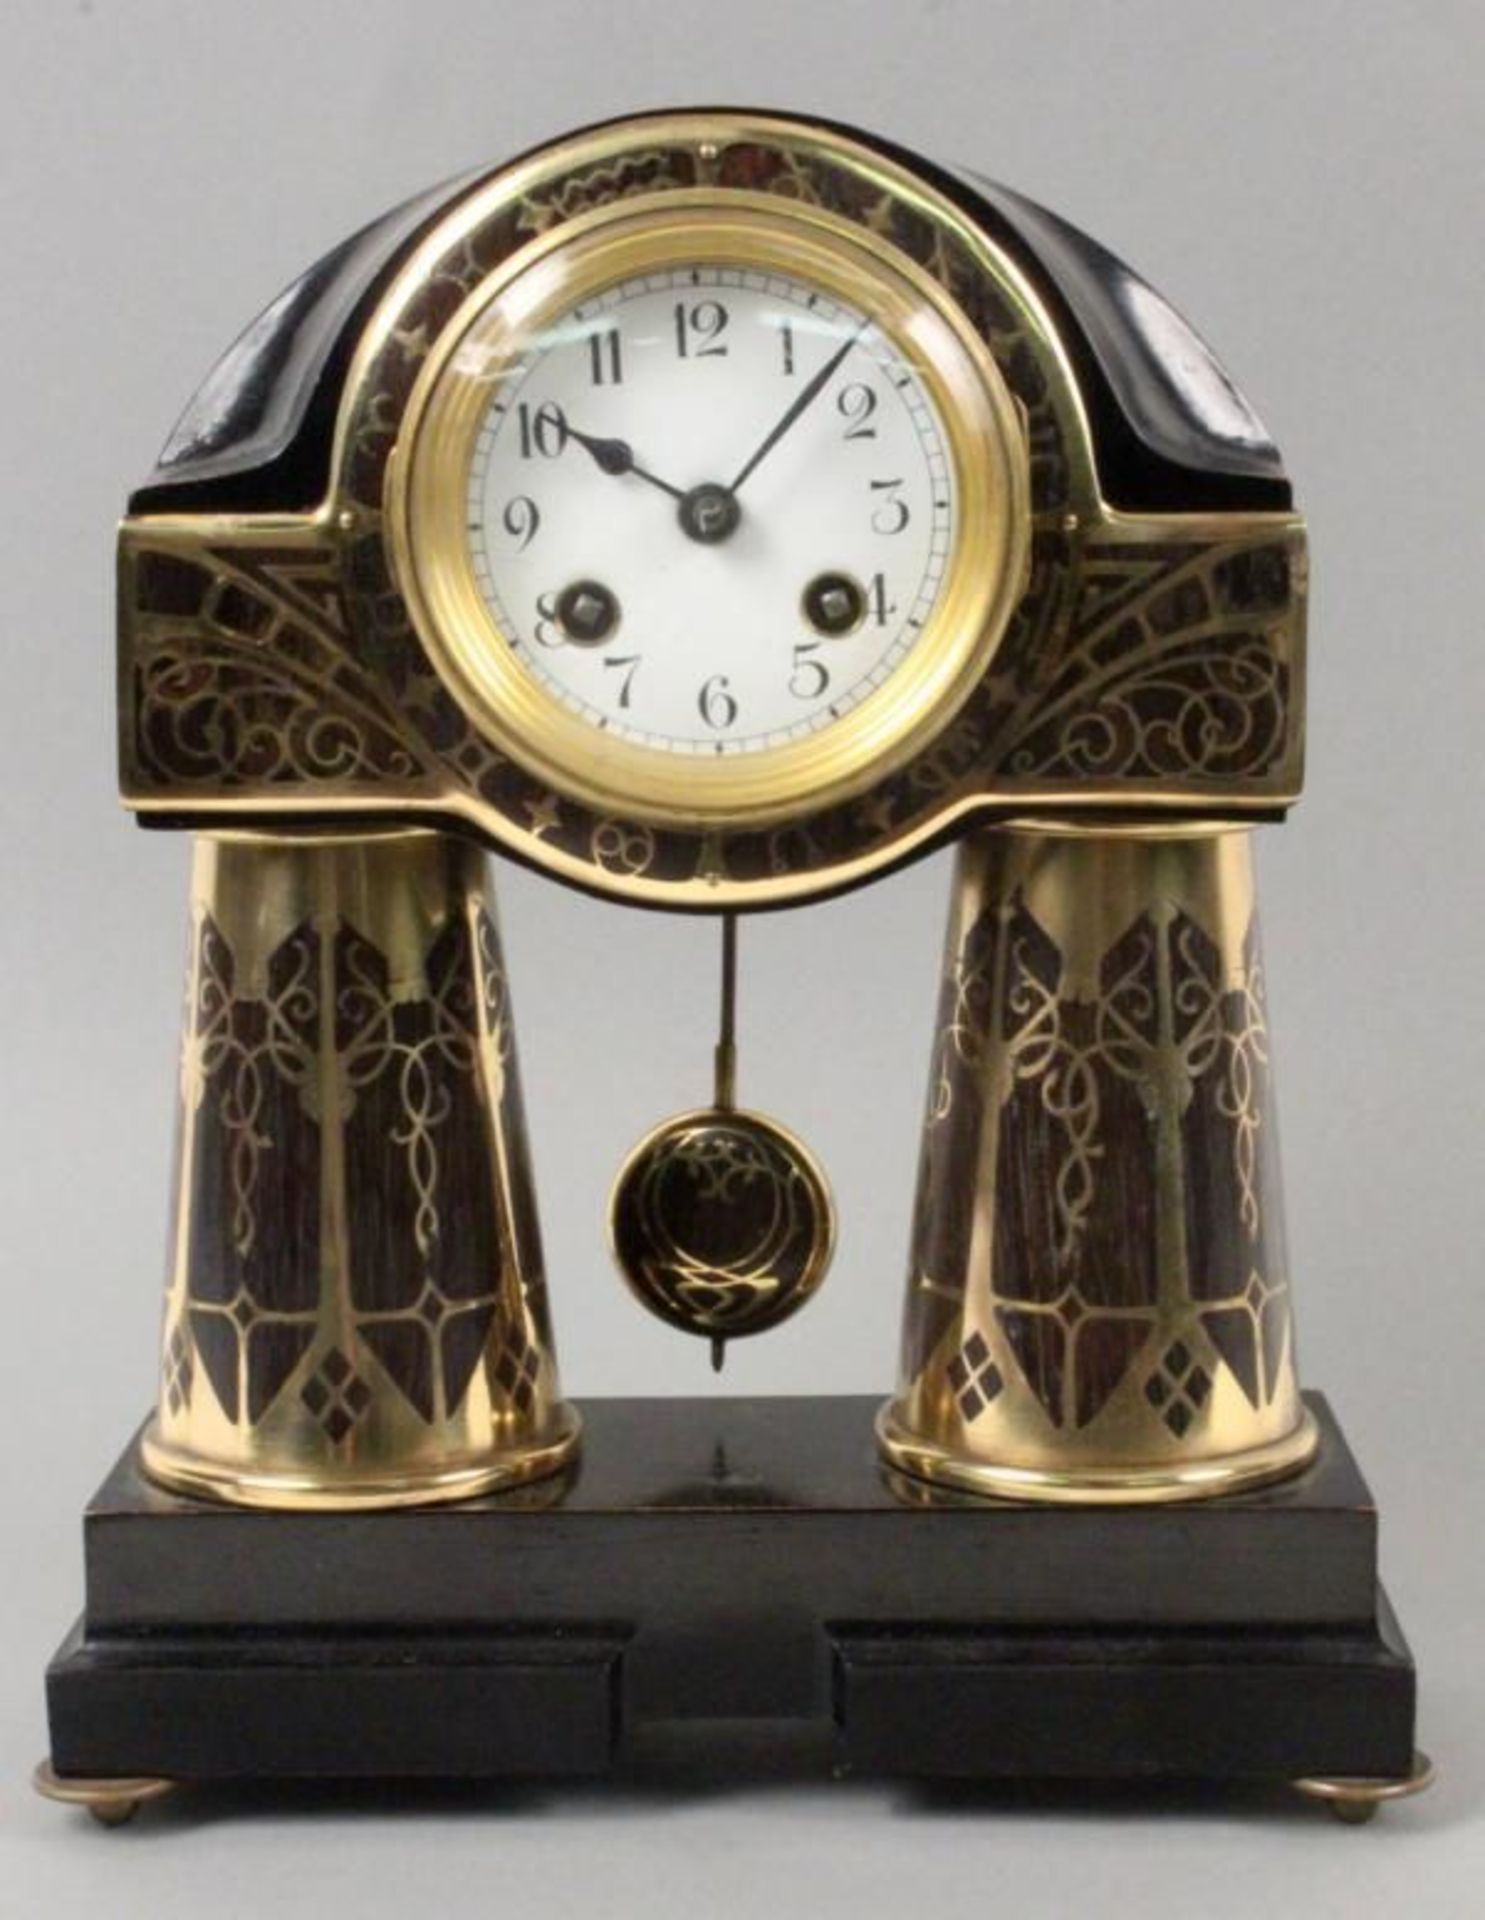 AN ART NOUVEAU MANTEL CLOCK Erhard & Söhne, Schw. Gmünd, ca. 1910 Lacquered wood with polished brass